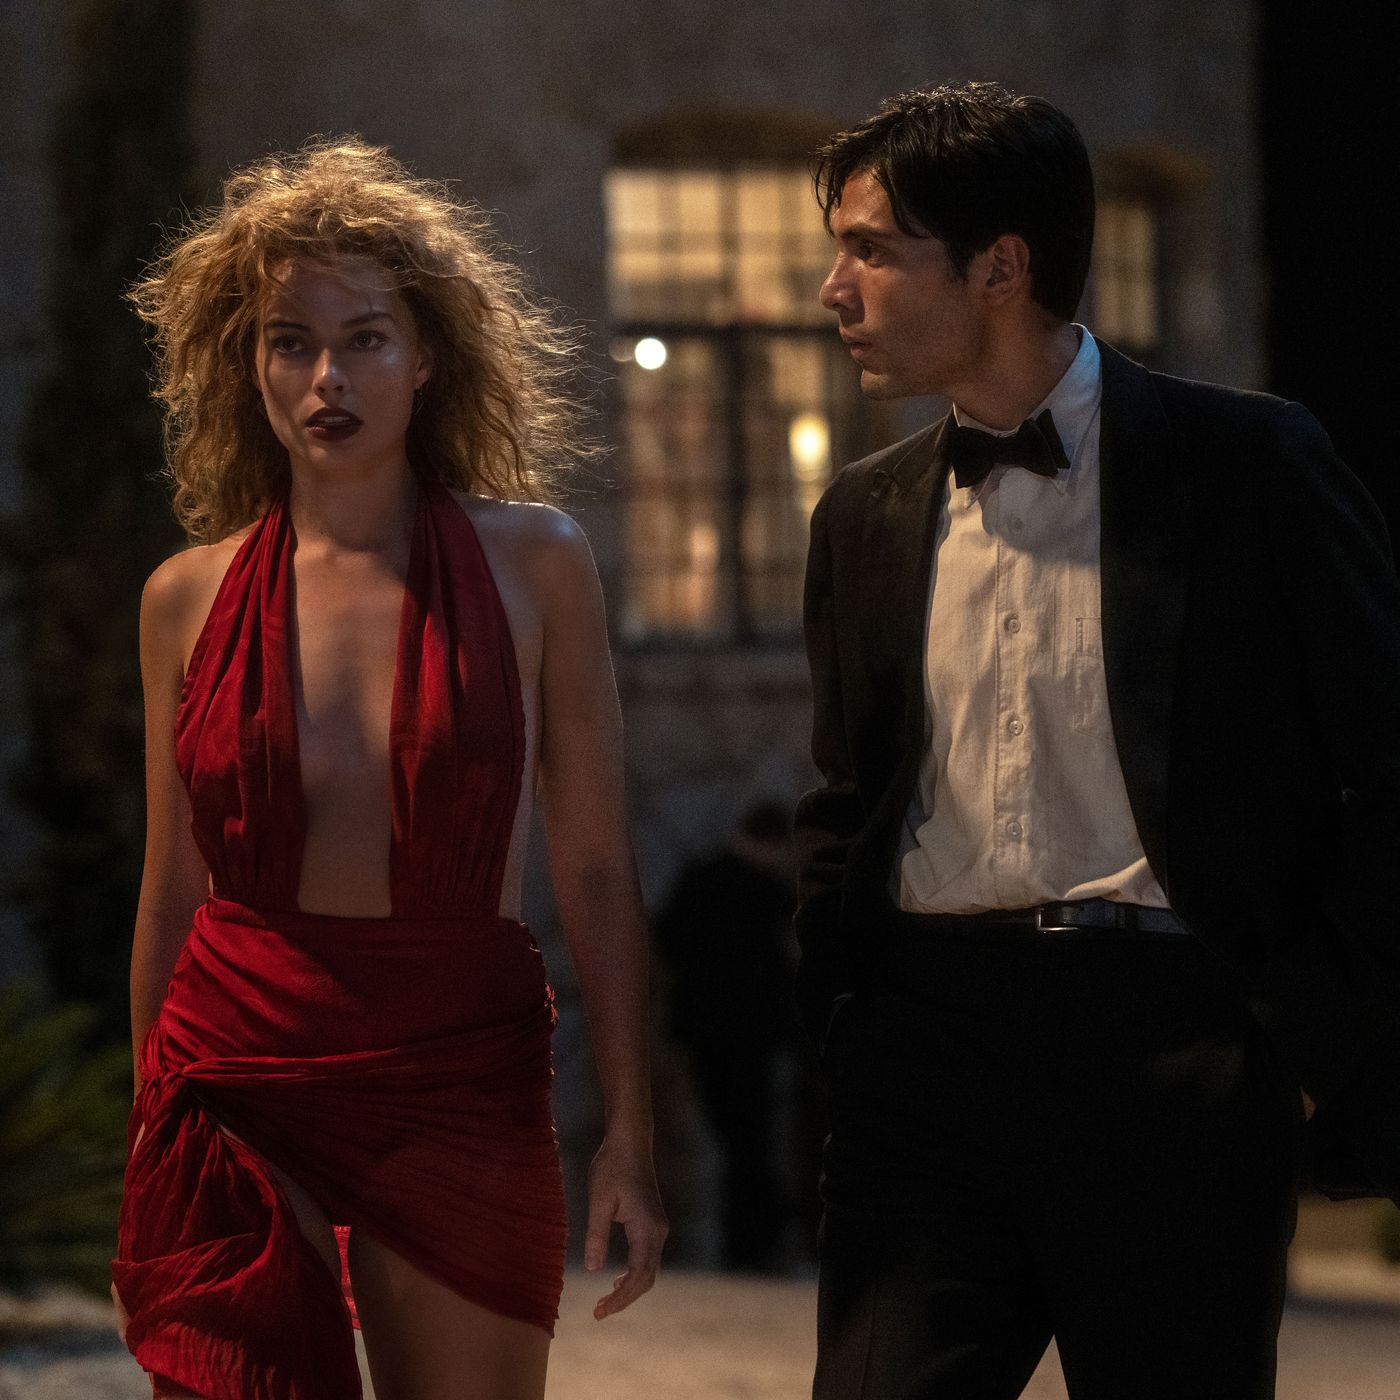 Babylon Movie Review Damien Chazelle, Wheres the Thrill? pic